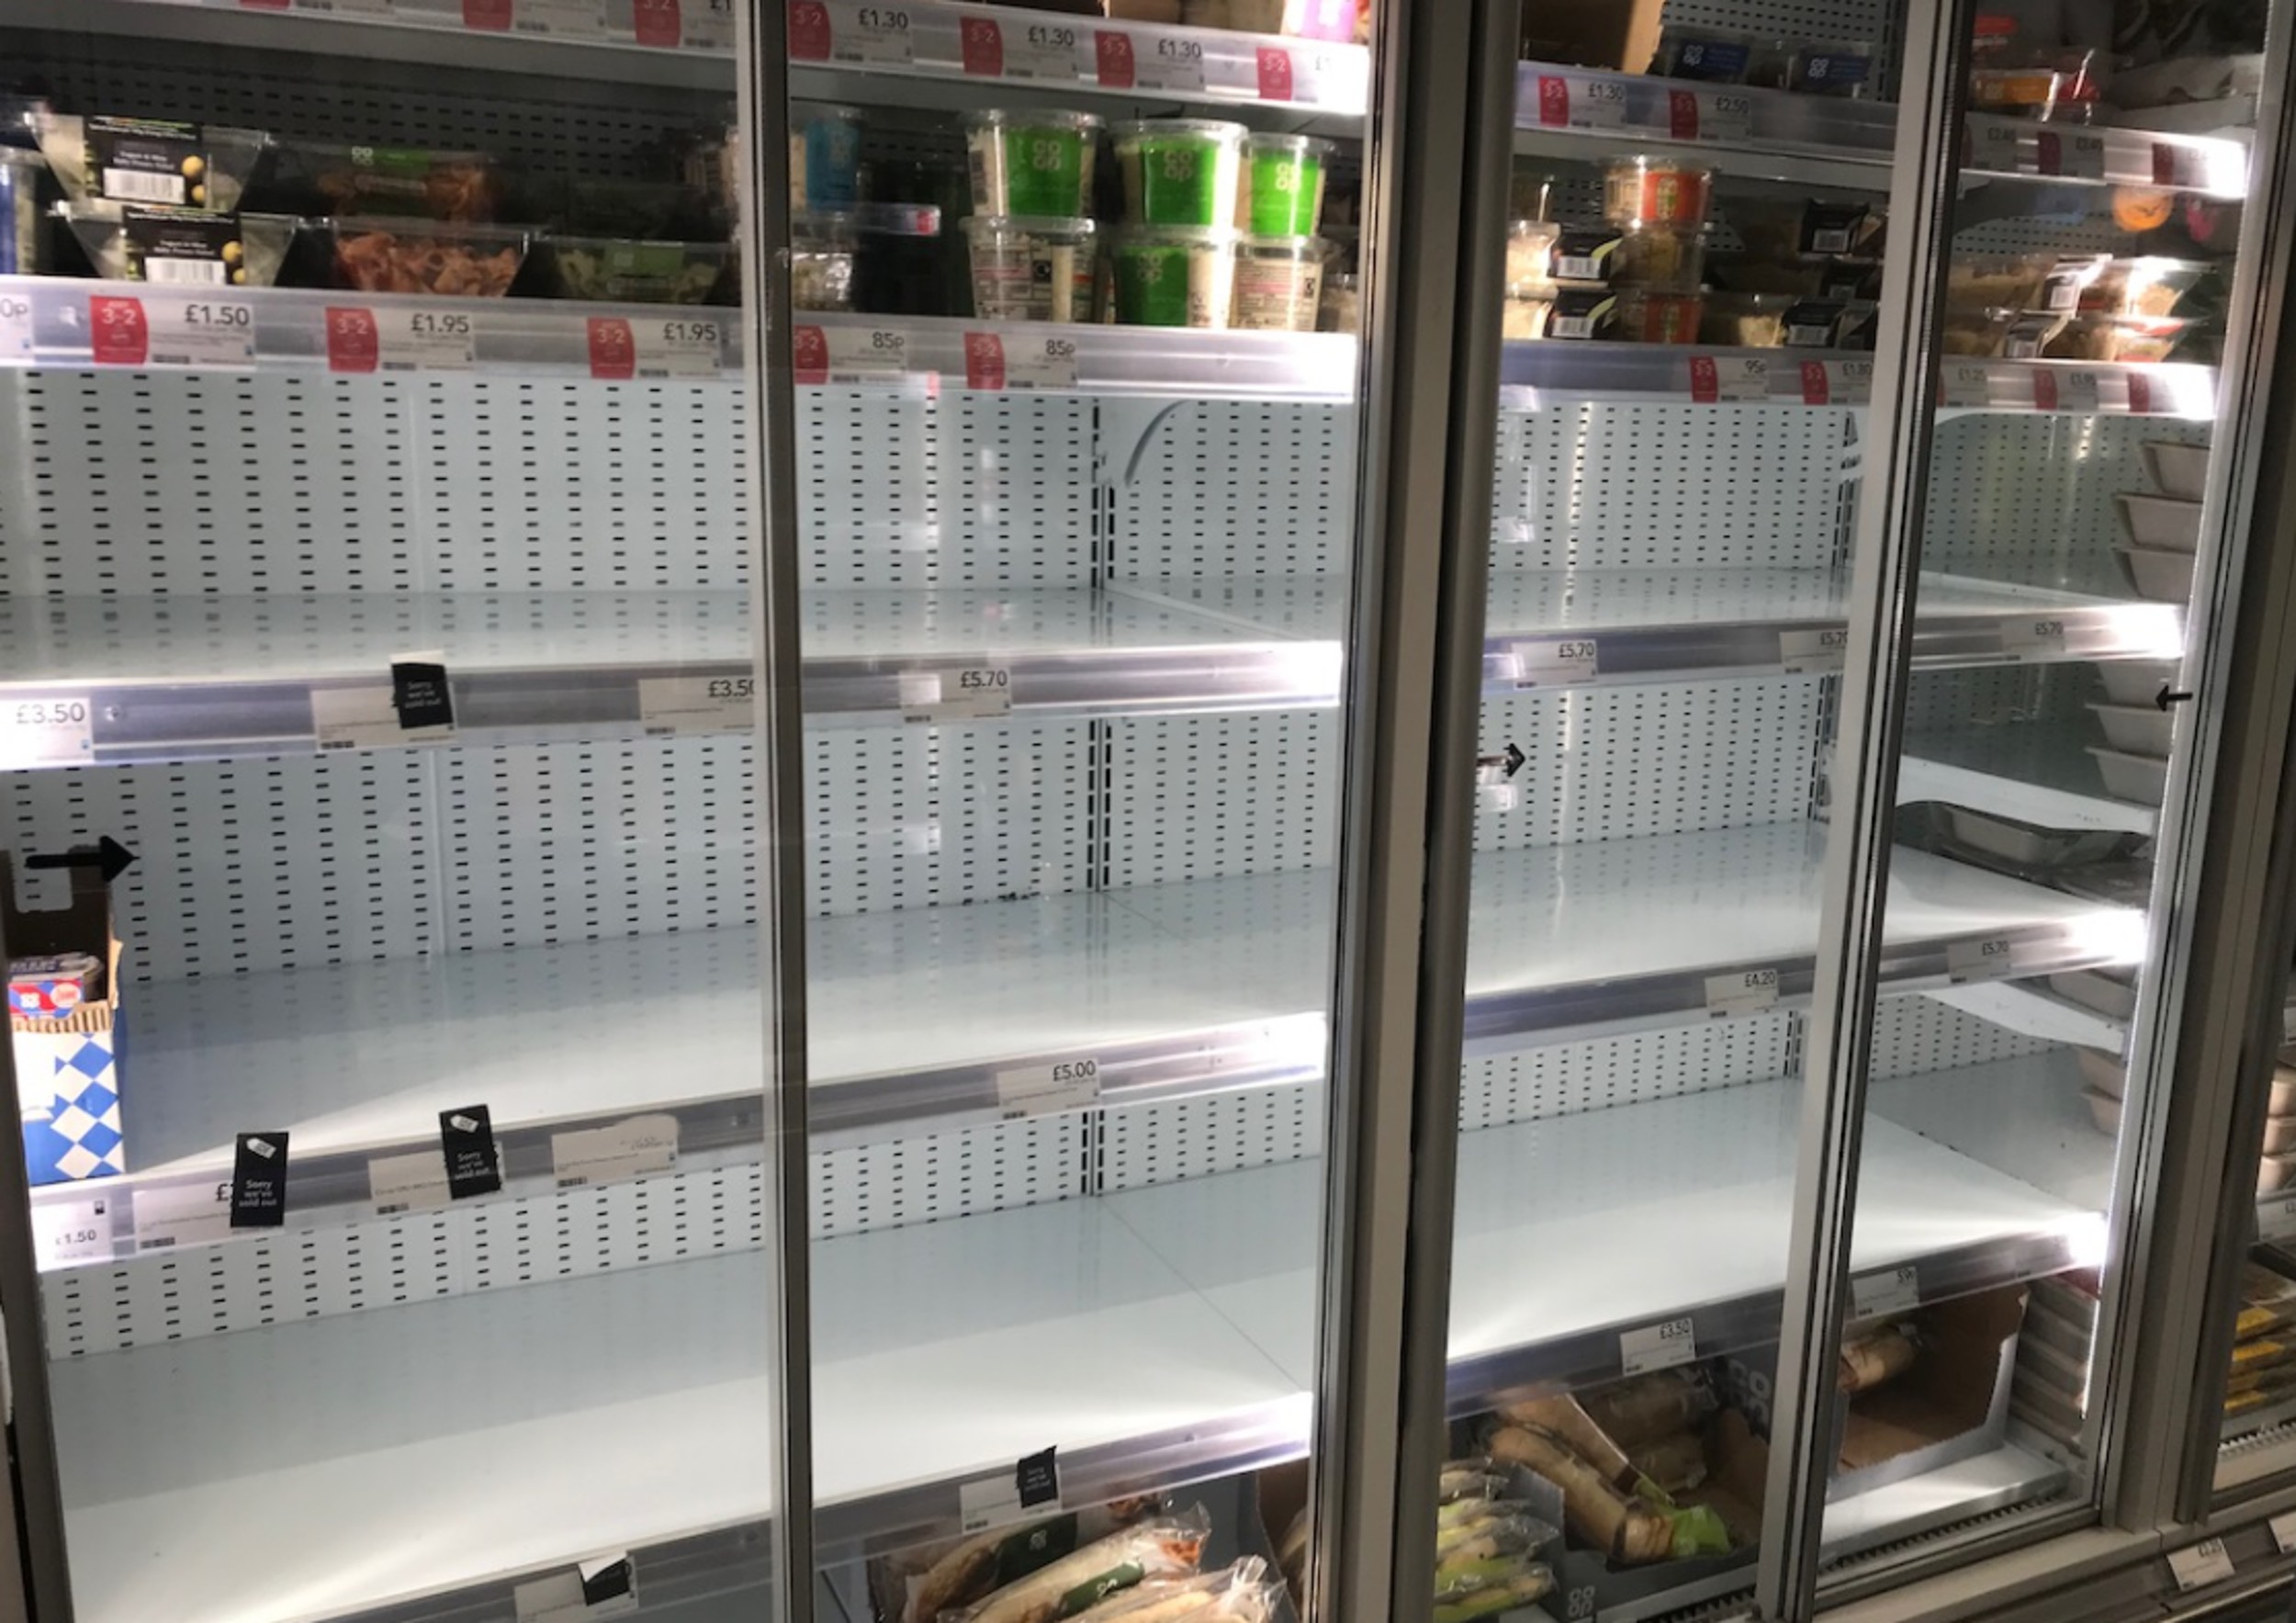 Empty freezers in Mull have left locals annoyed